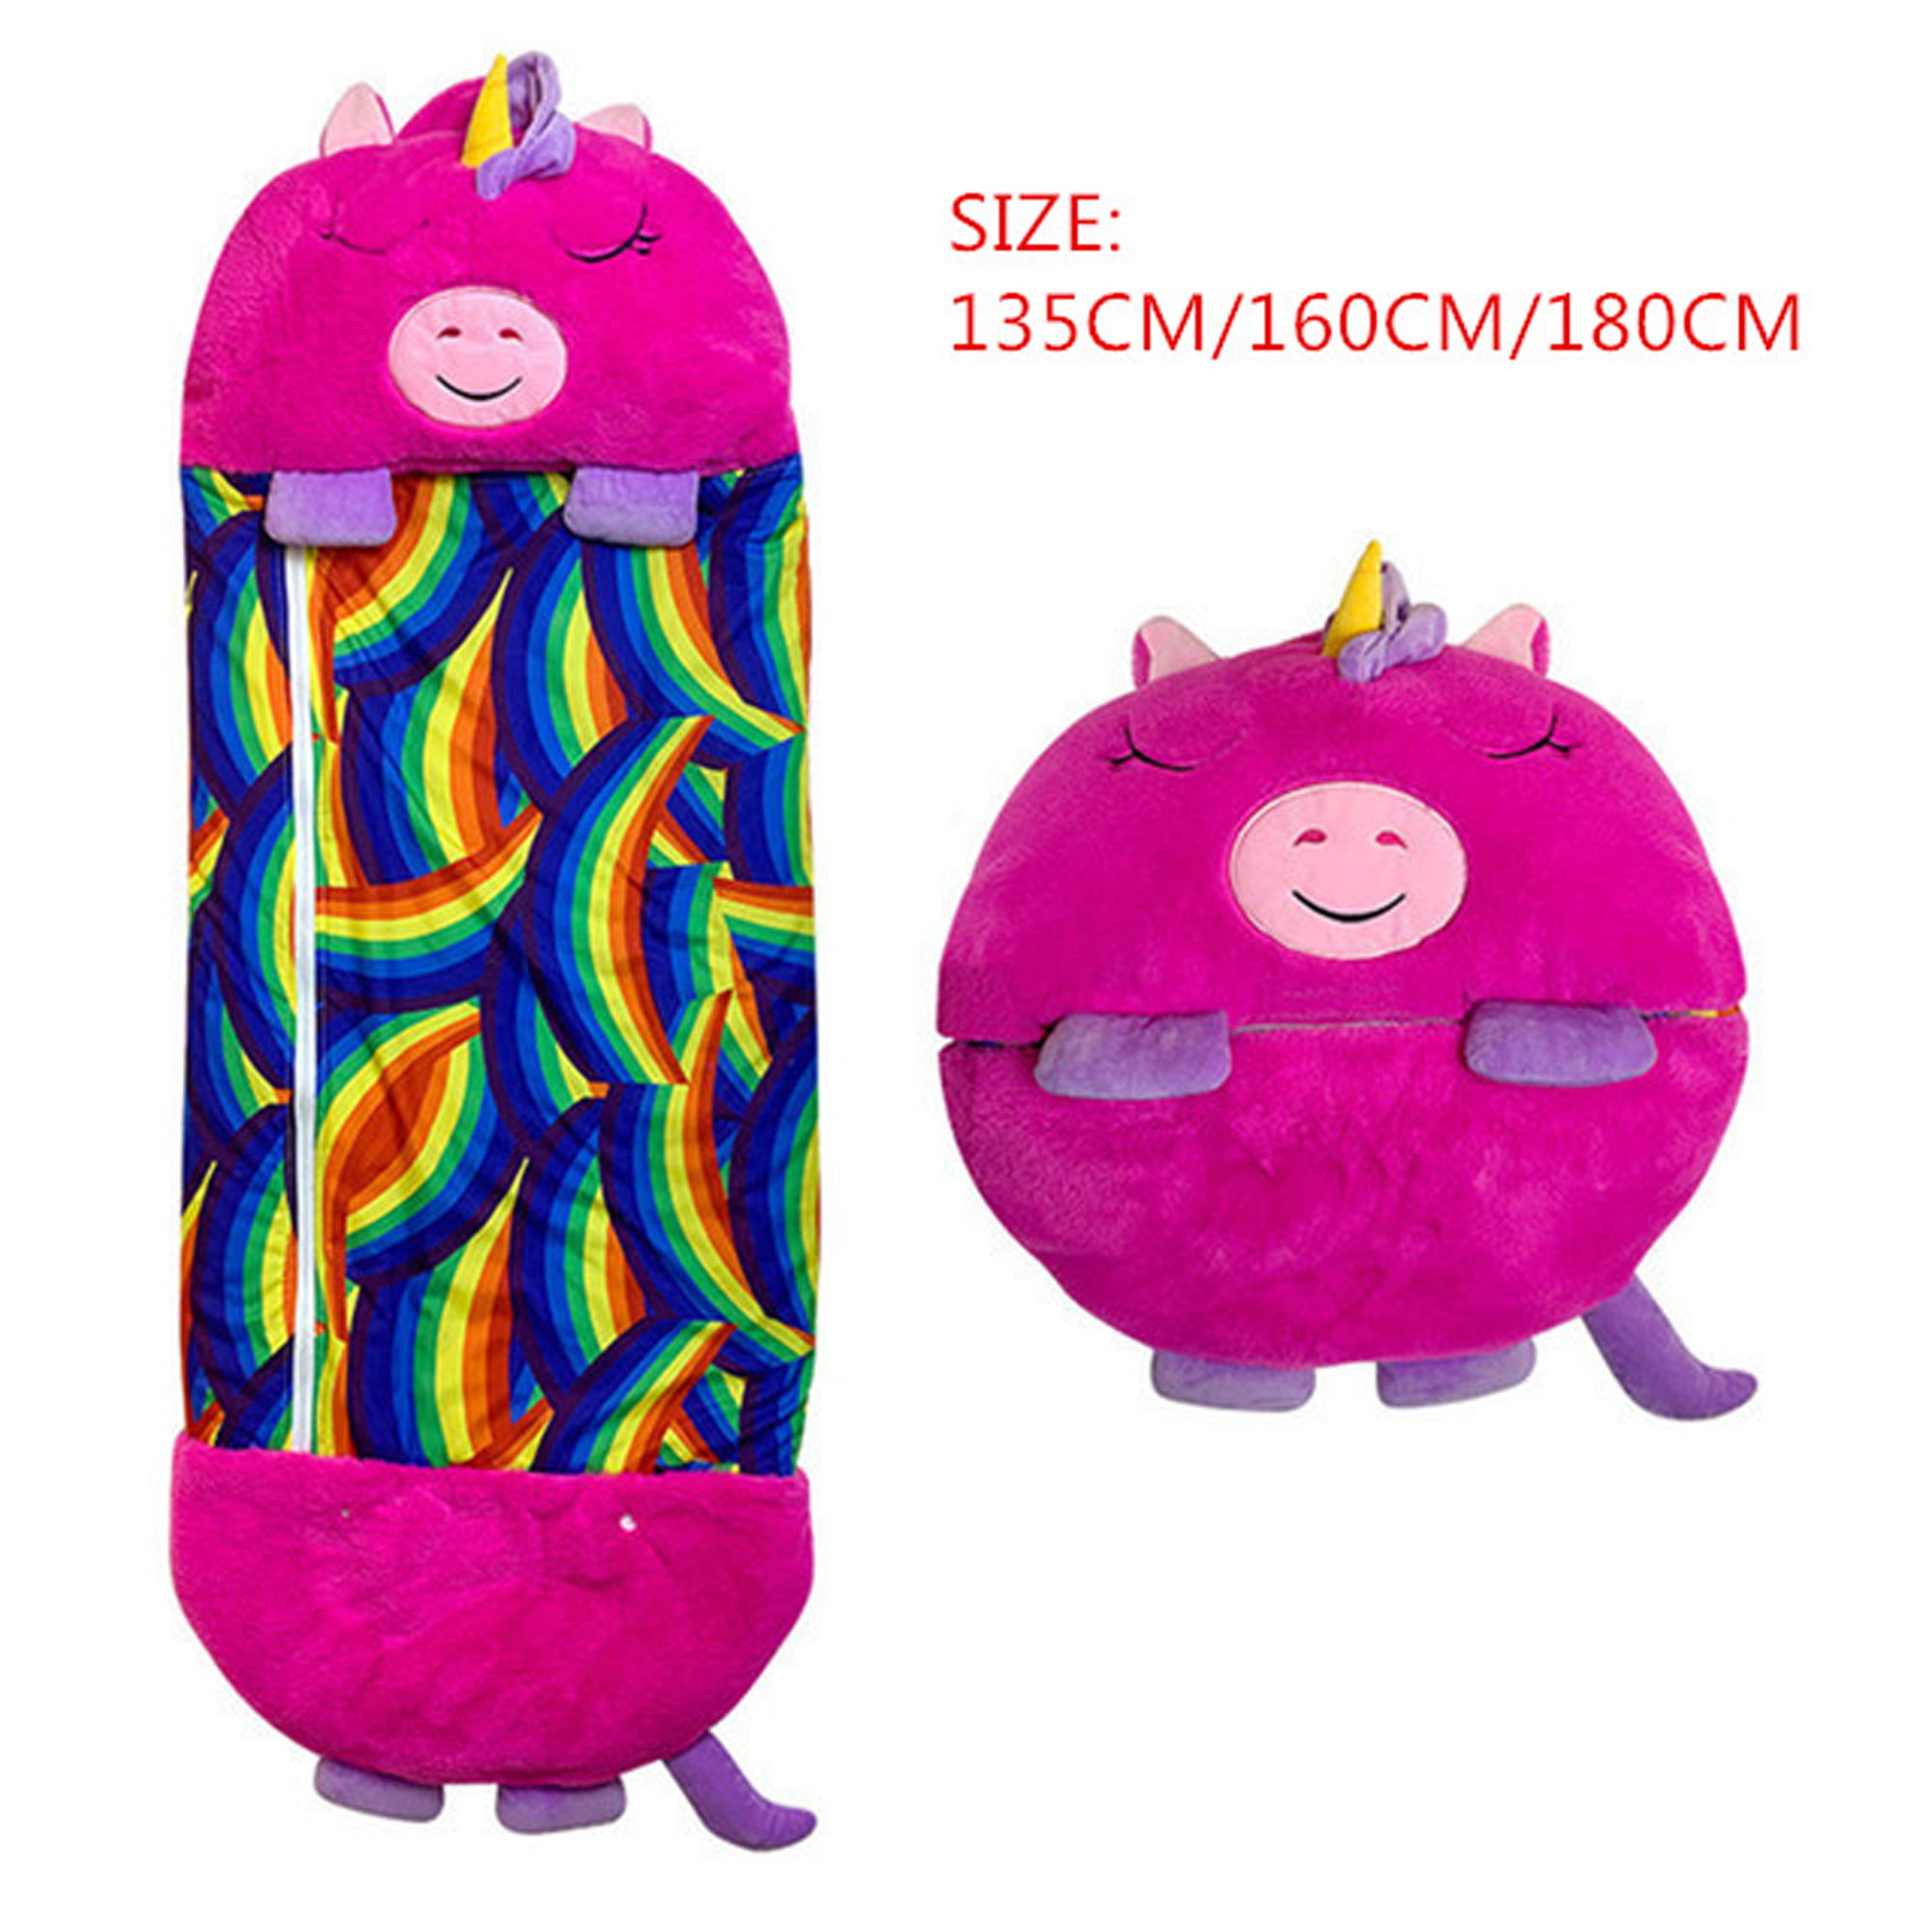 180cm Large Size Happy Nappers Sleeping Bag Kids Play Pillow Unicorn Xmas Gifts 